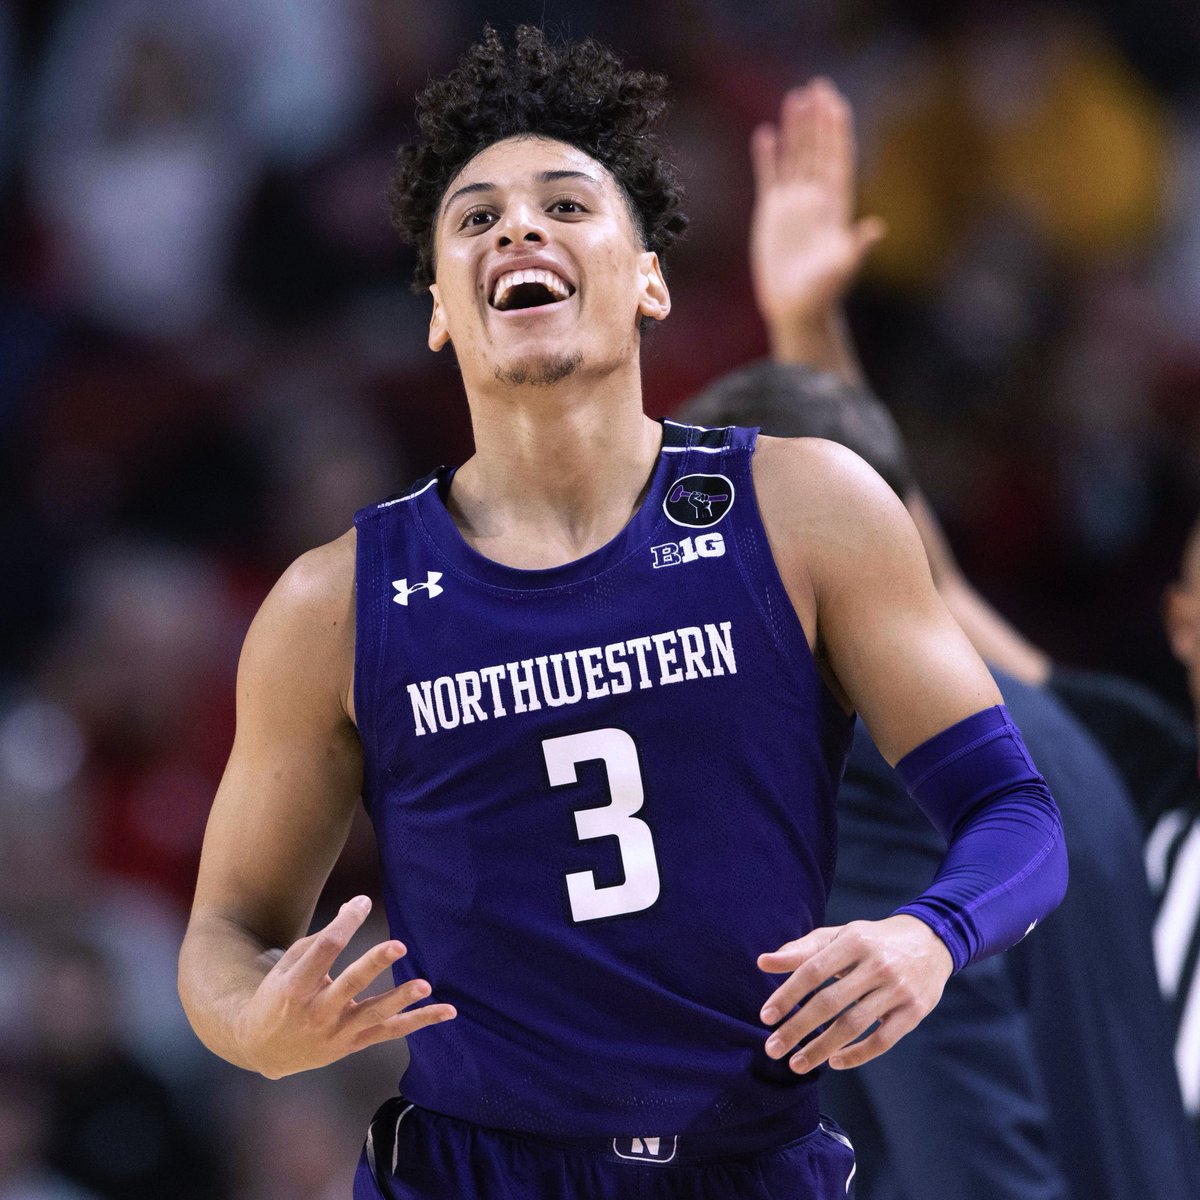 BREAKING: Northwestern guard Ty Berry is returning to school for his 5th year, per his Instagram page. Averaged 11.6 points and shot 43.3% from three this season — before injury. One of the best shooters in the country.